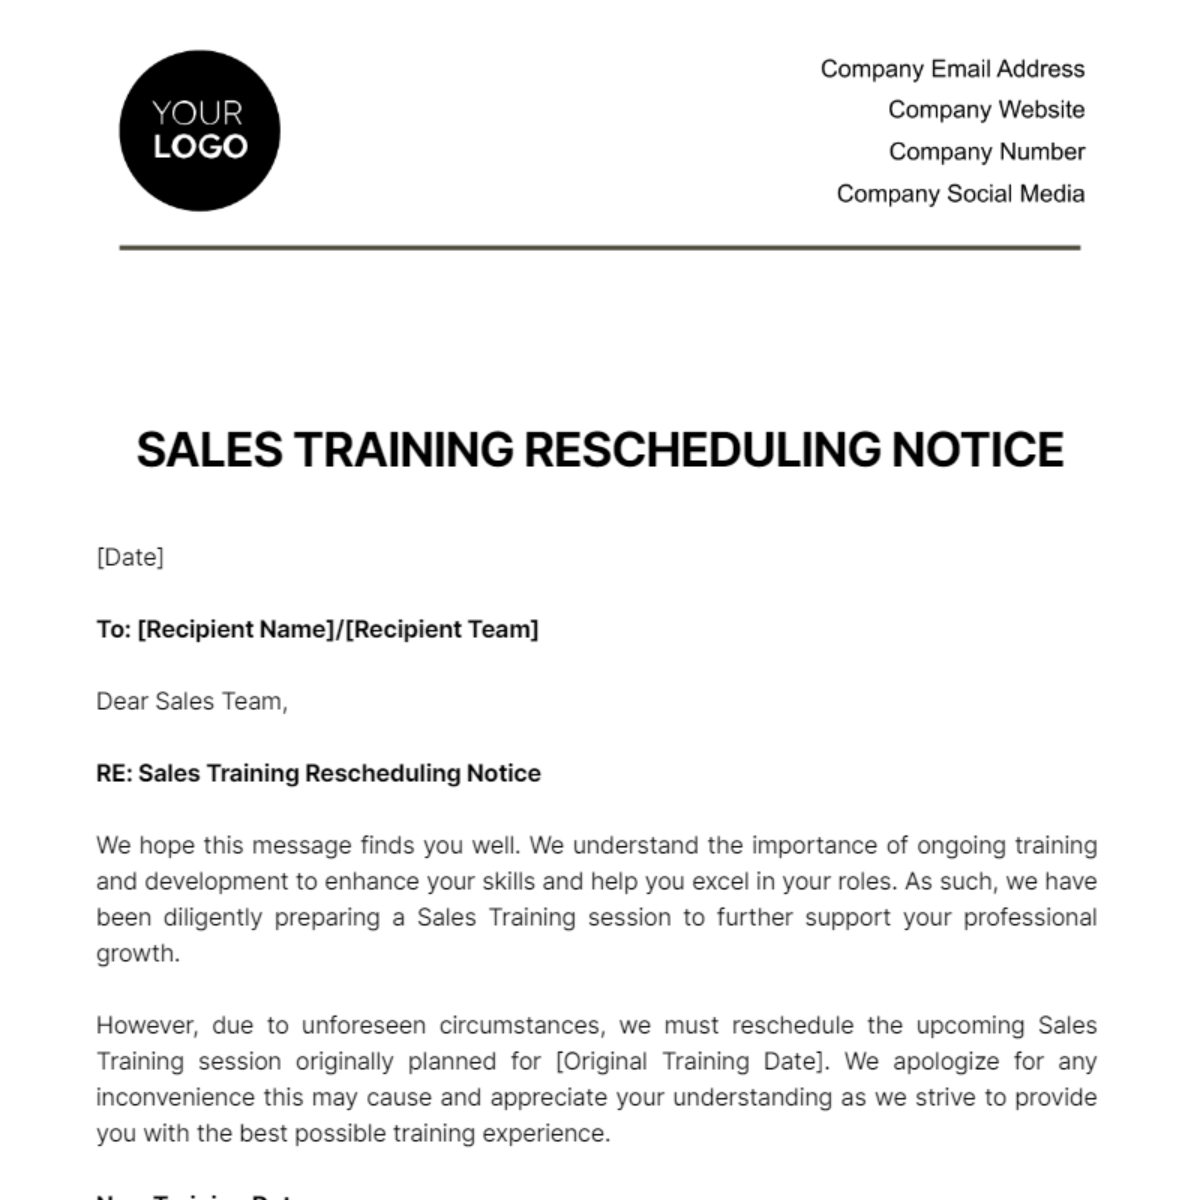 Free Sales Training Rescheduling Notice Template